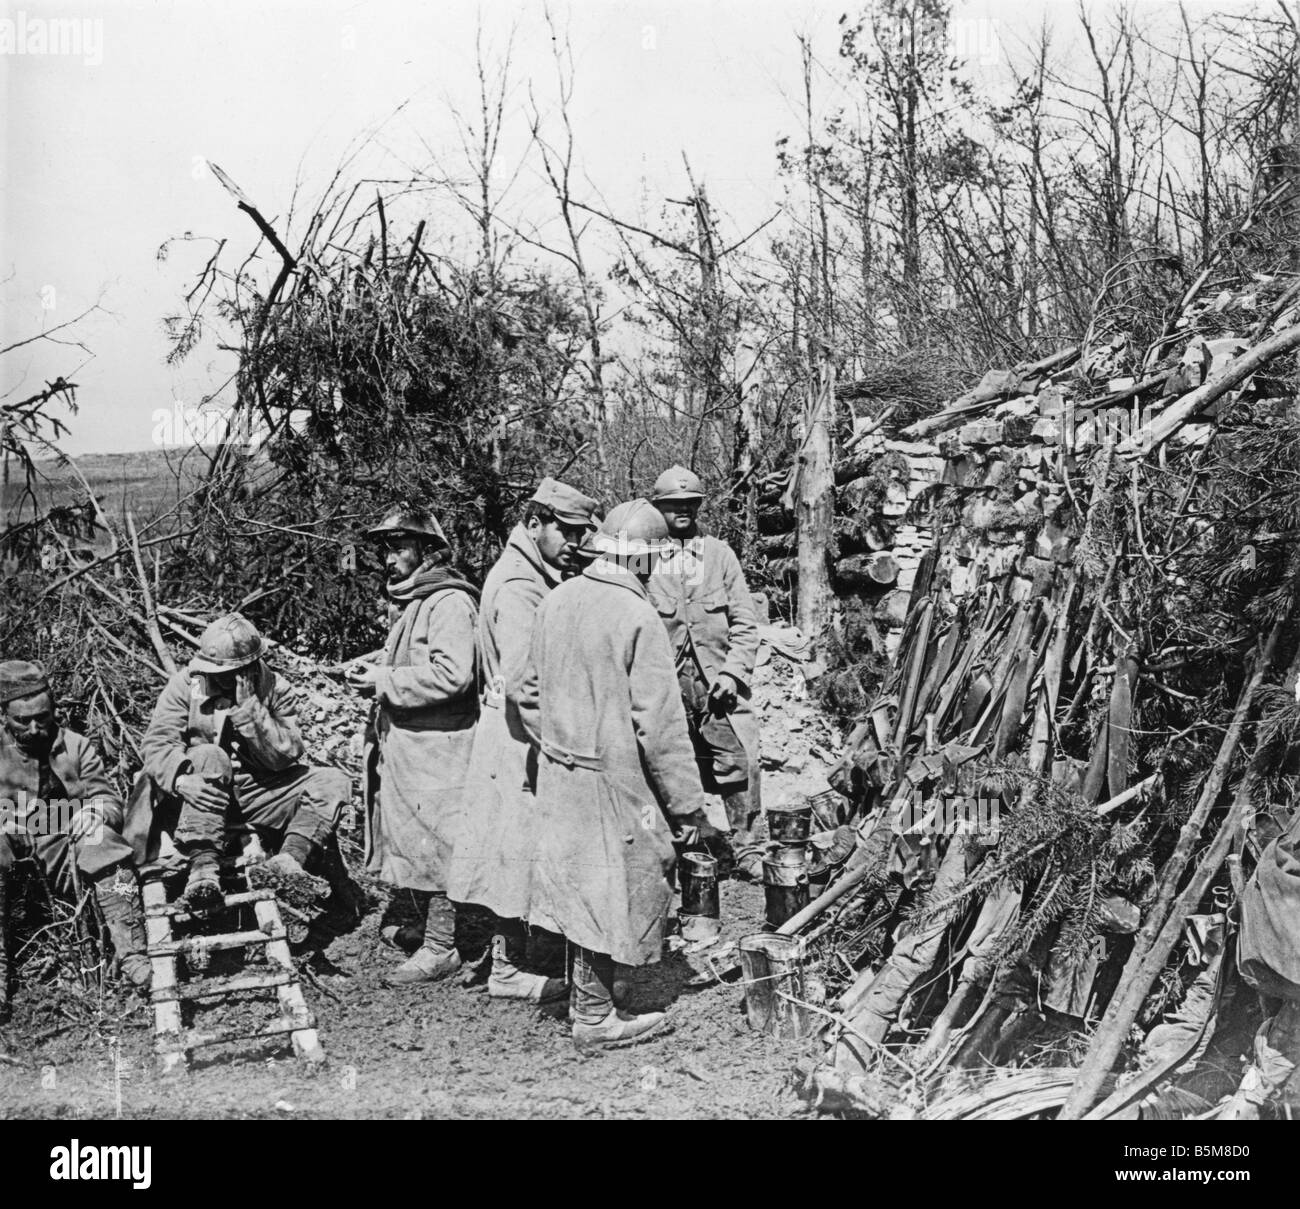 2 G55 F1 1916 22 E WW1 Battle of Verdun French soldiers History World War One France Trench warfare near Verdun French soliders Stock Photo